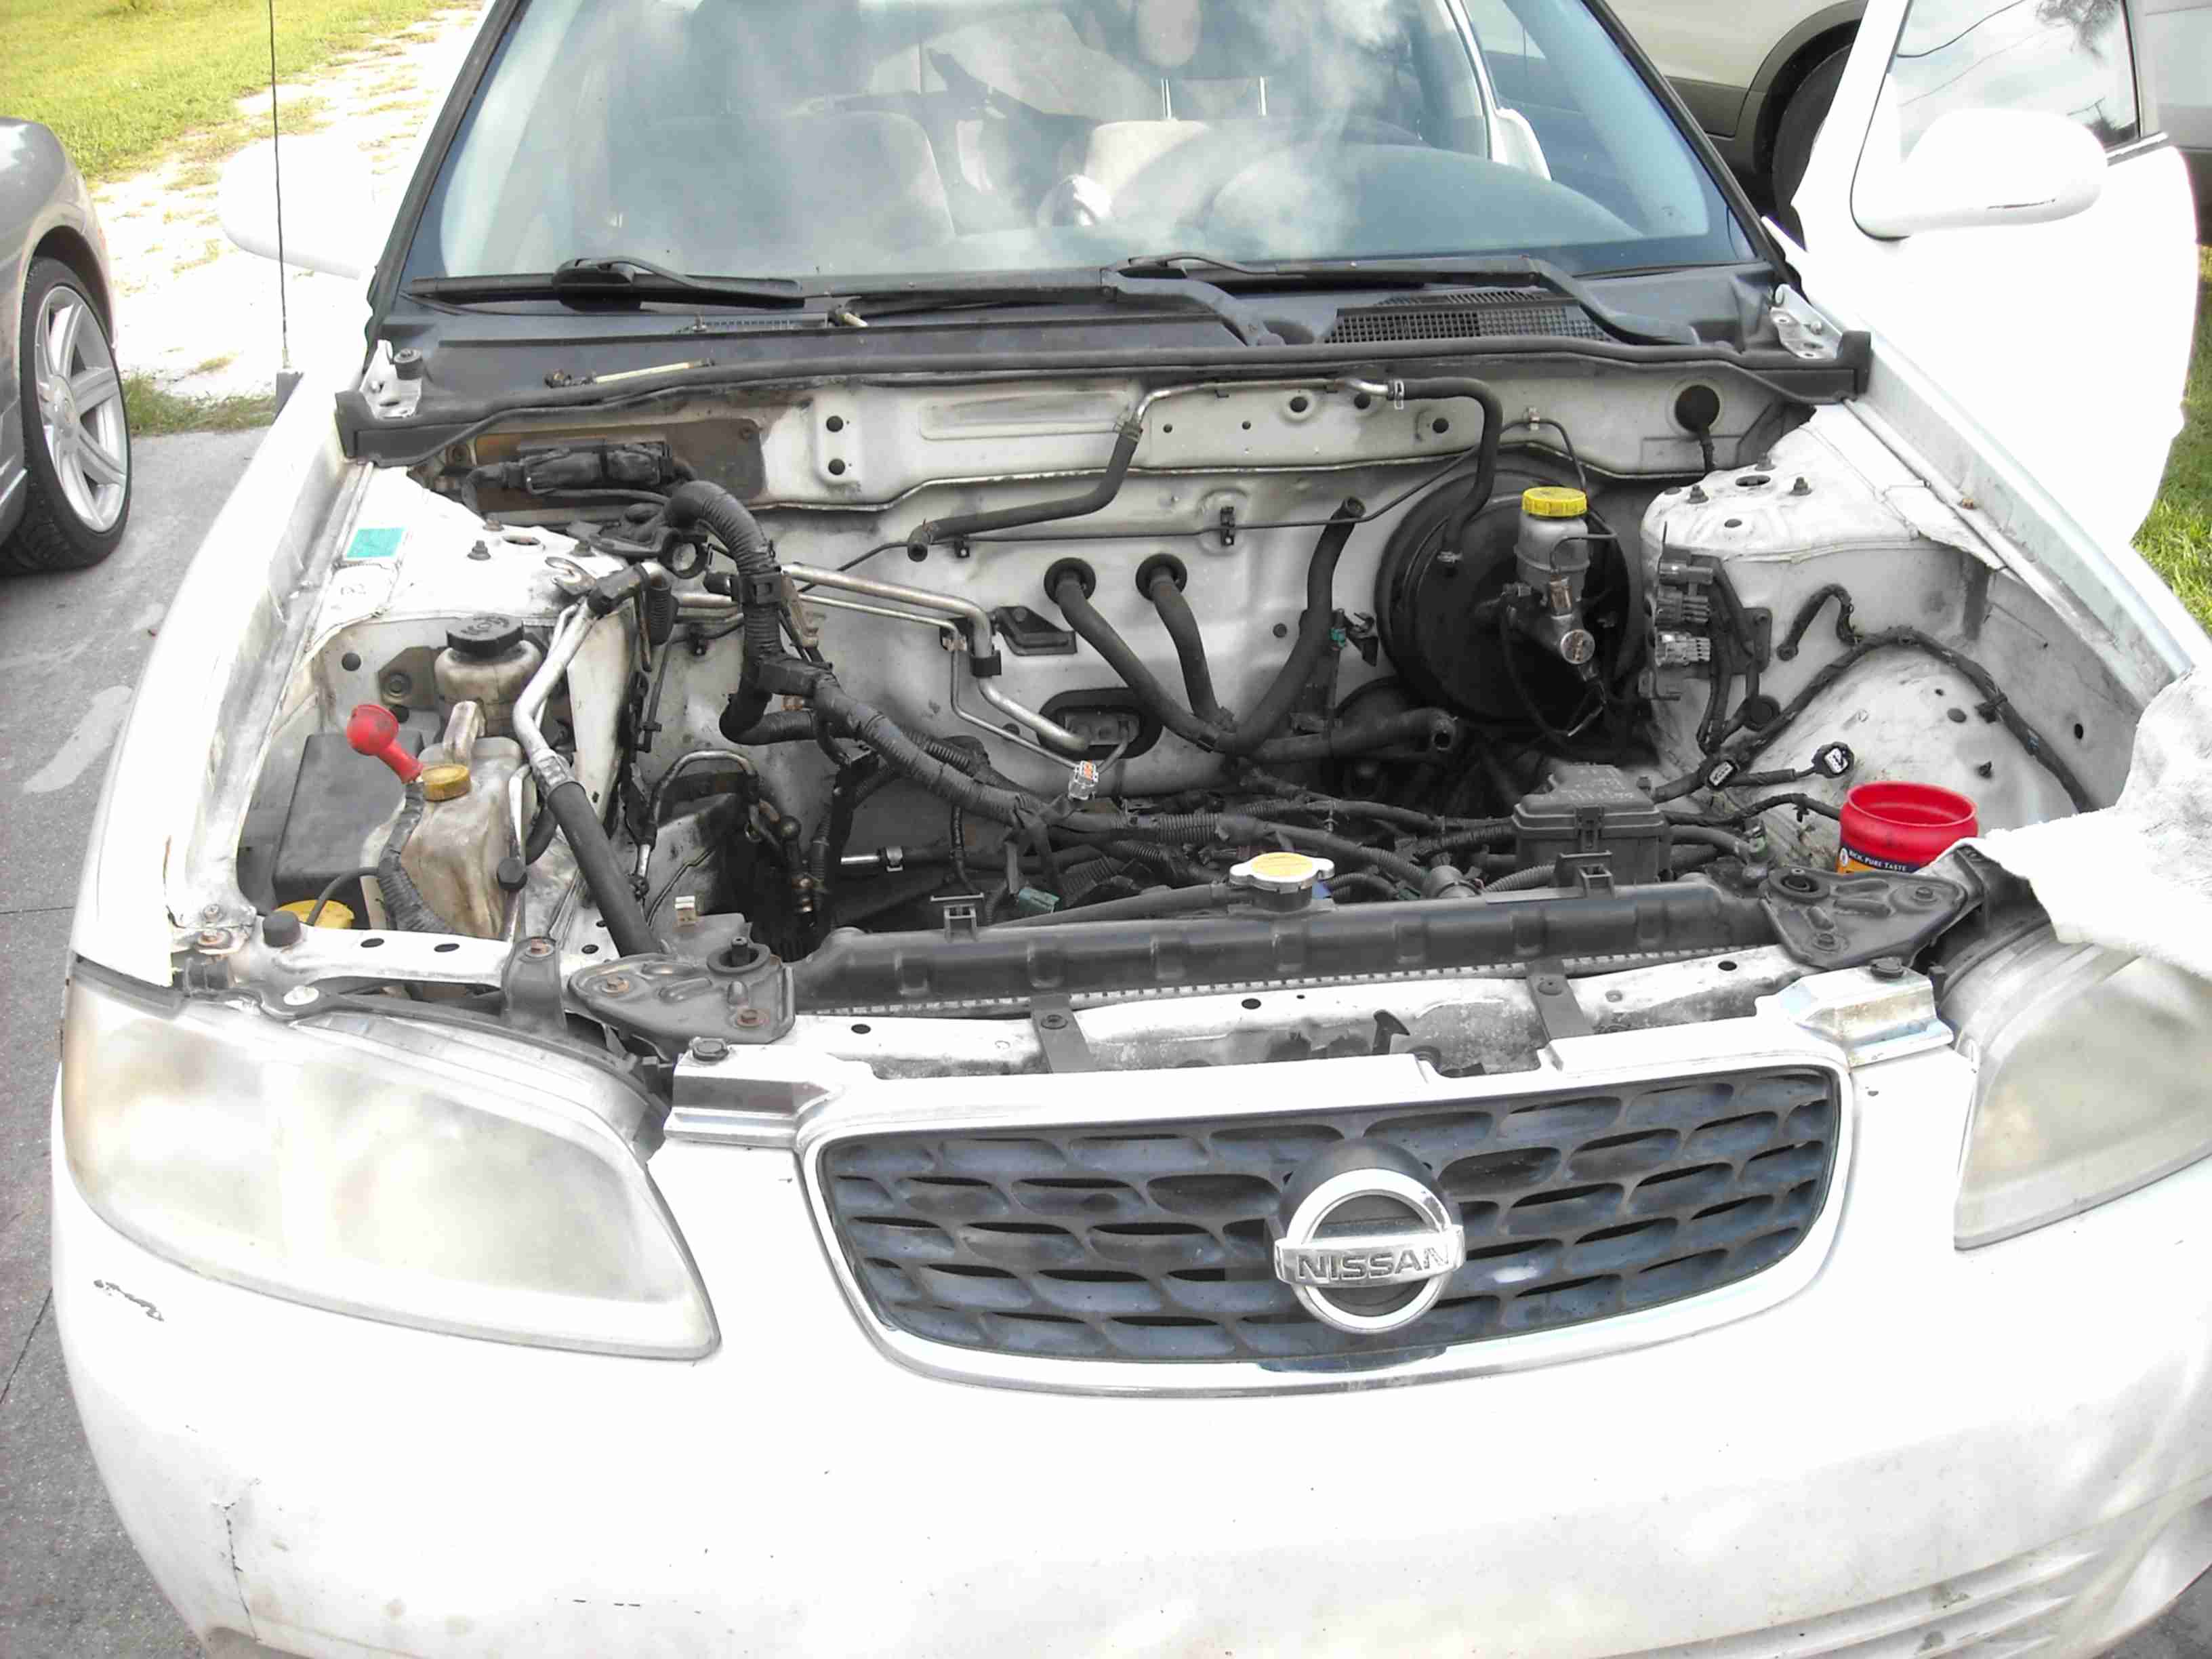 A white Nissan Sentra without an Engine